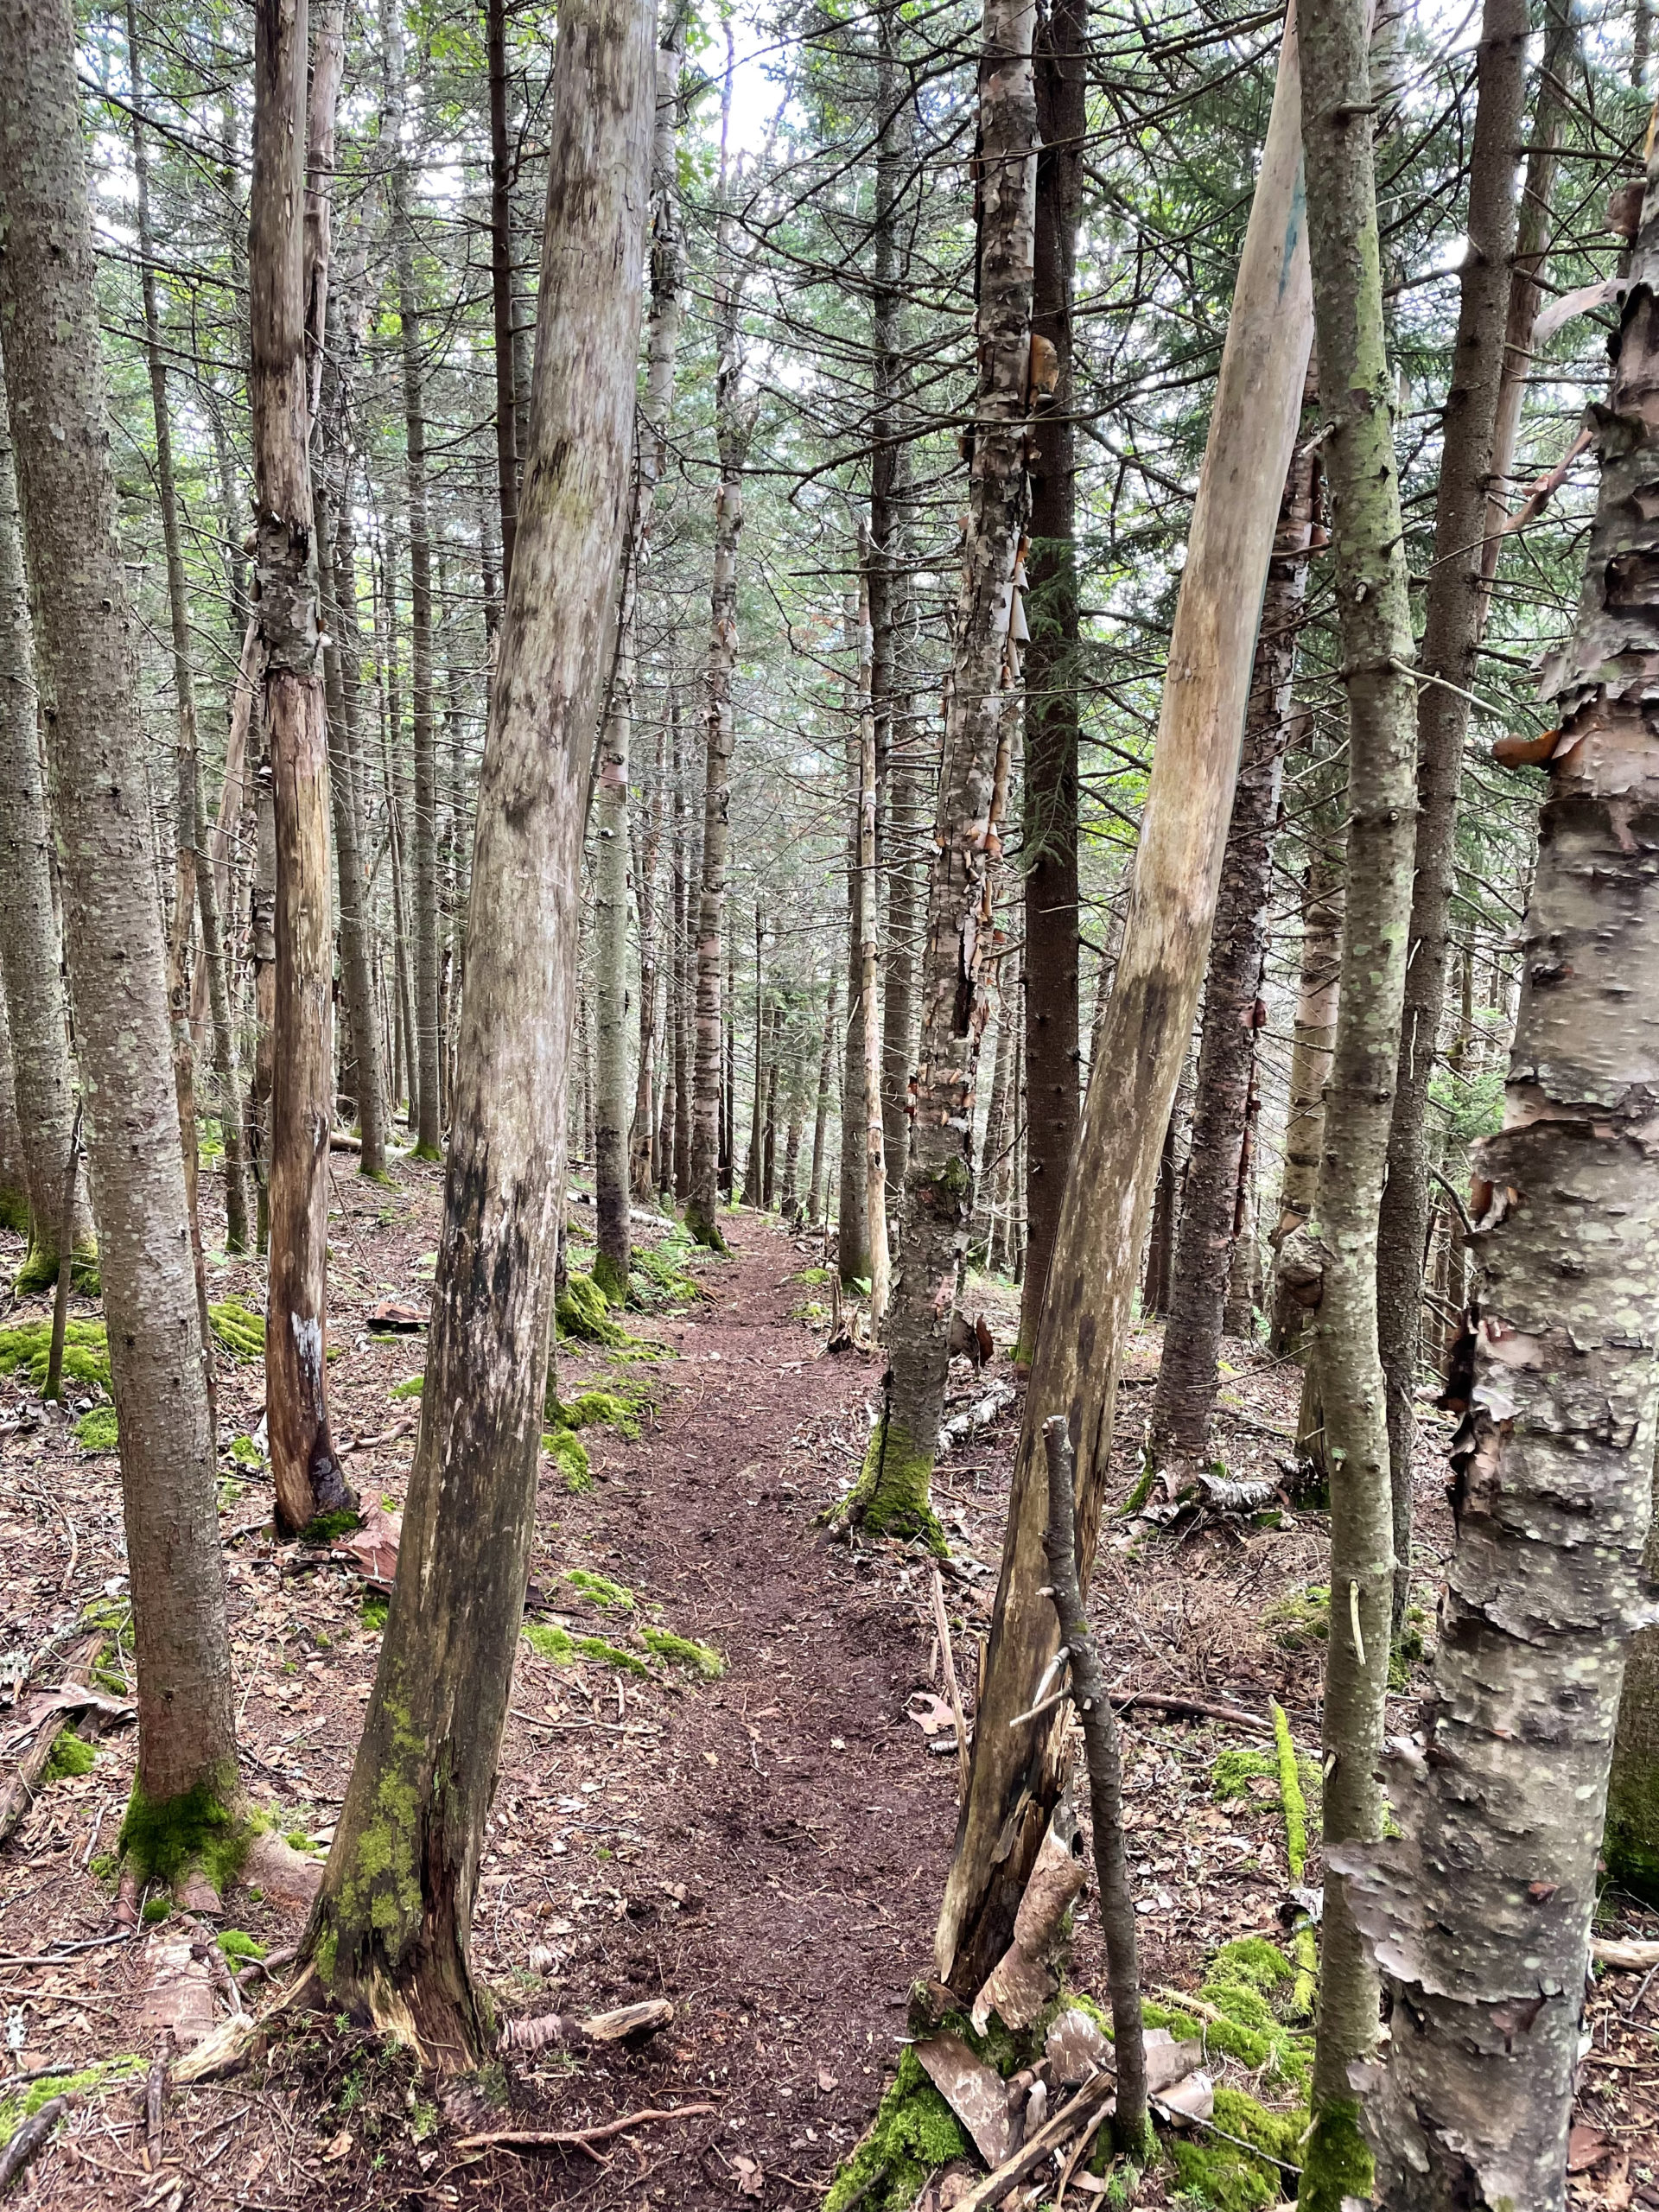 Trail through the trees, seen while hiking Owl's Head Mtn in the White Mountain National Forest, New Hampshire